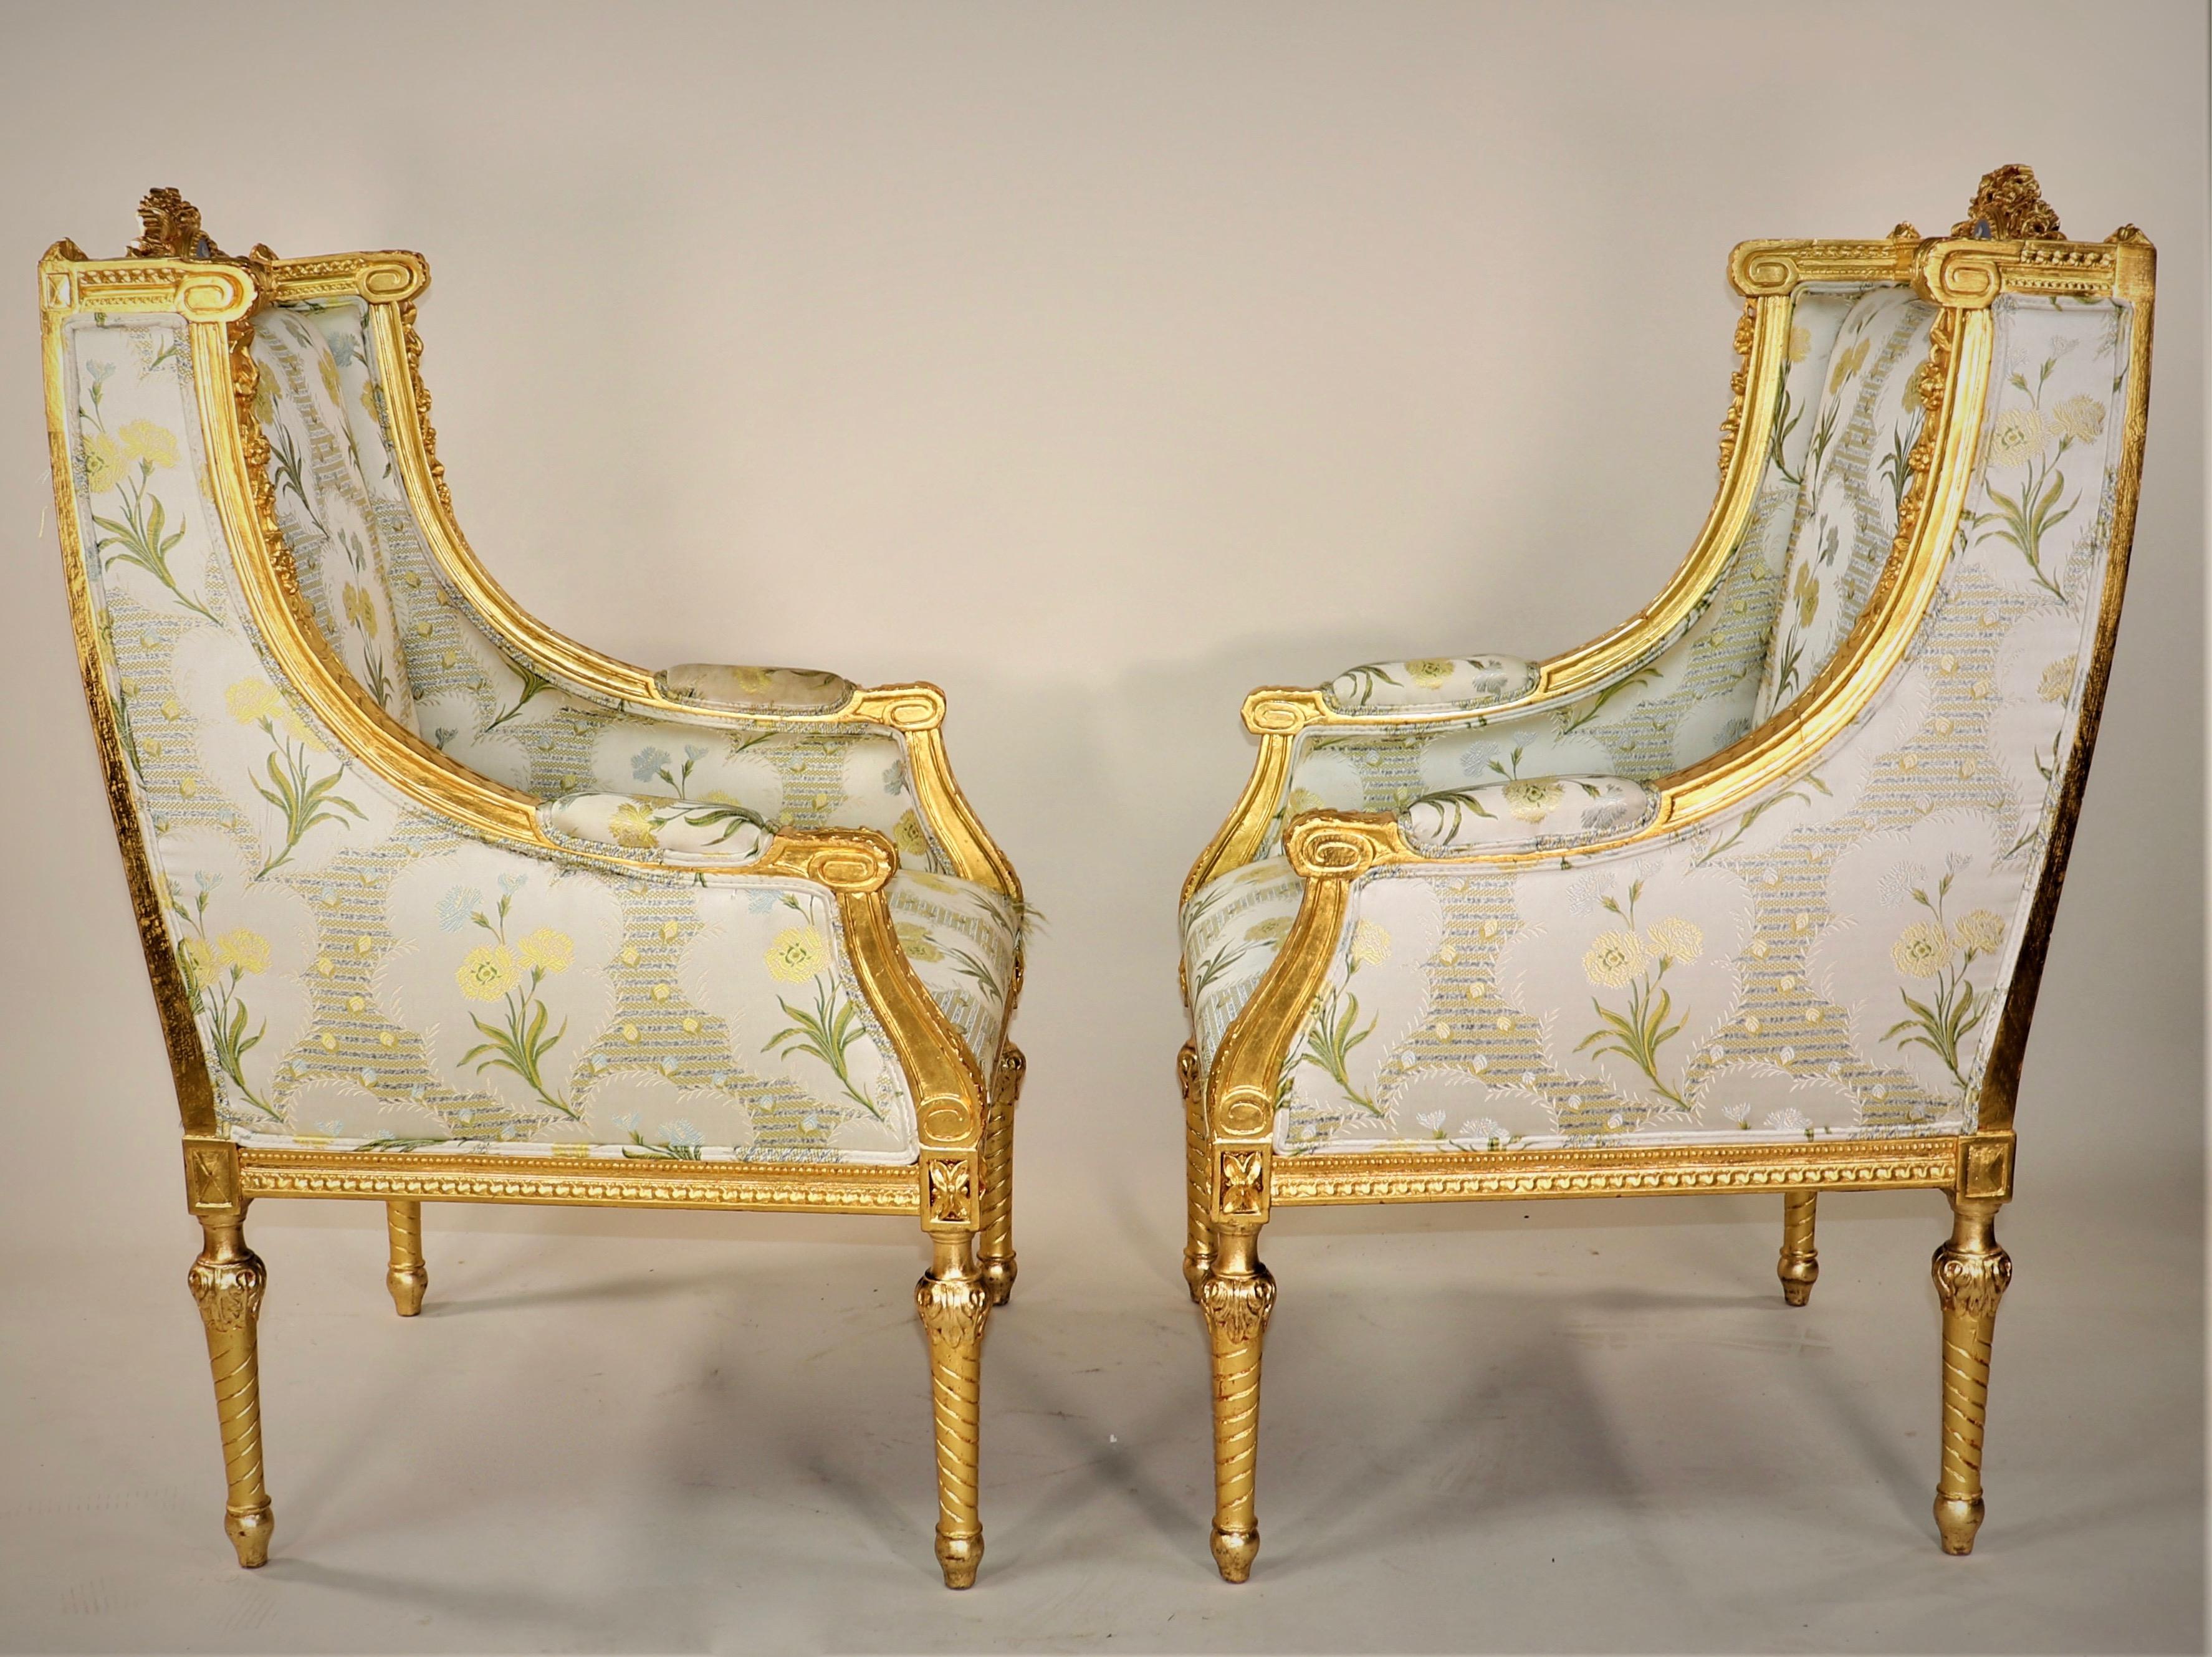 A pair of Circa 1900 French Louis XVI Style Gilt armchairs. This majestic pair of chairs has a beautiful green floral silk embroidered fabric with a luminous gold gilt wooden frame. Each chair has a jasperware medallion crowing the top of the backs.